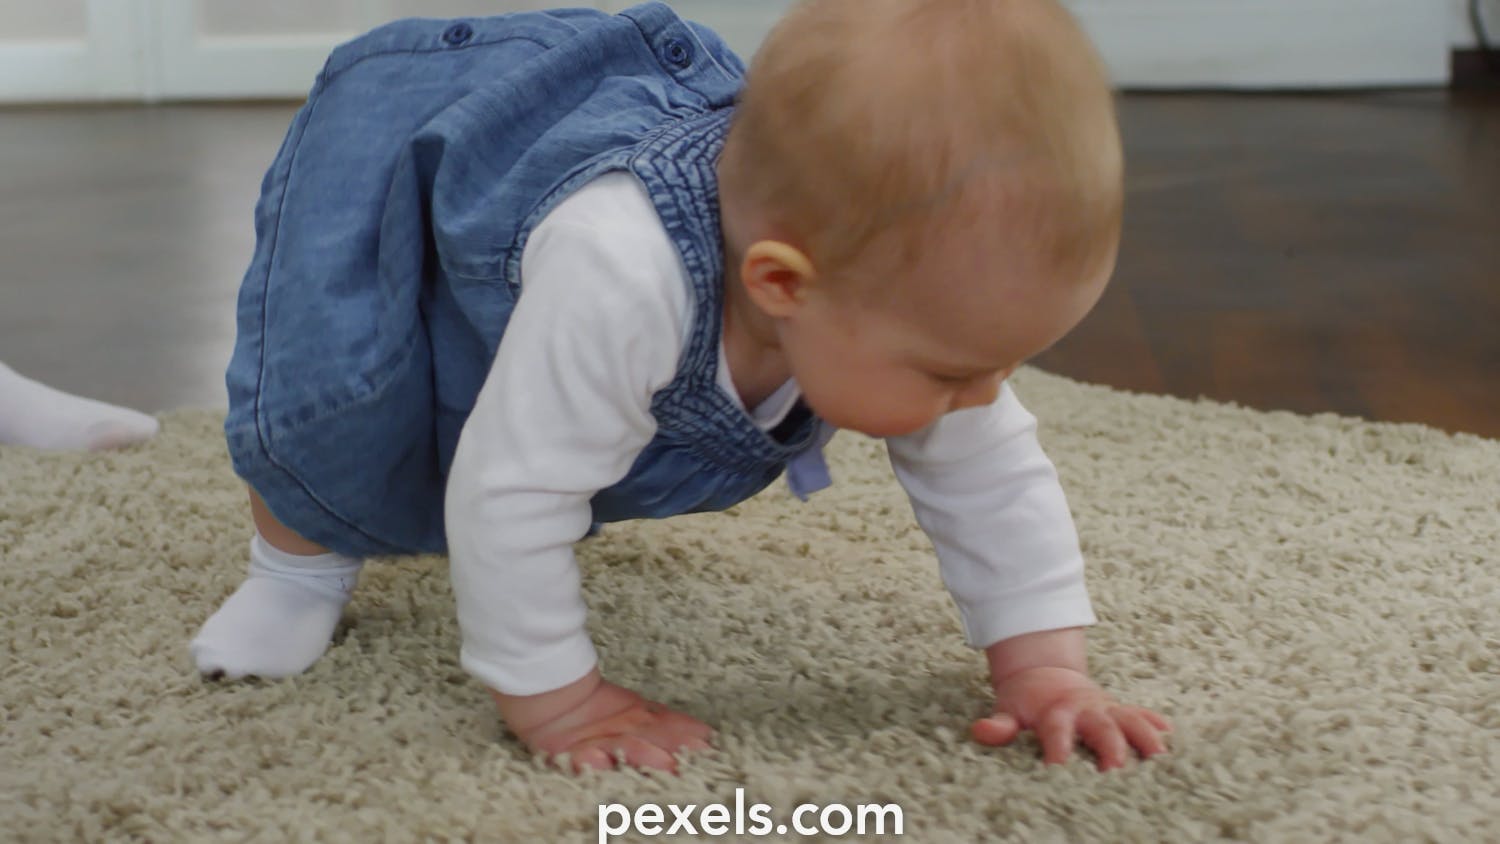 Baby Xxxii Videos - Baby Videos, Download Free 4k Stock Video Footage & Baby HD Video Clips